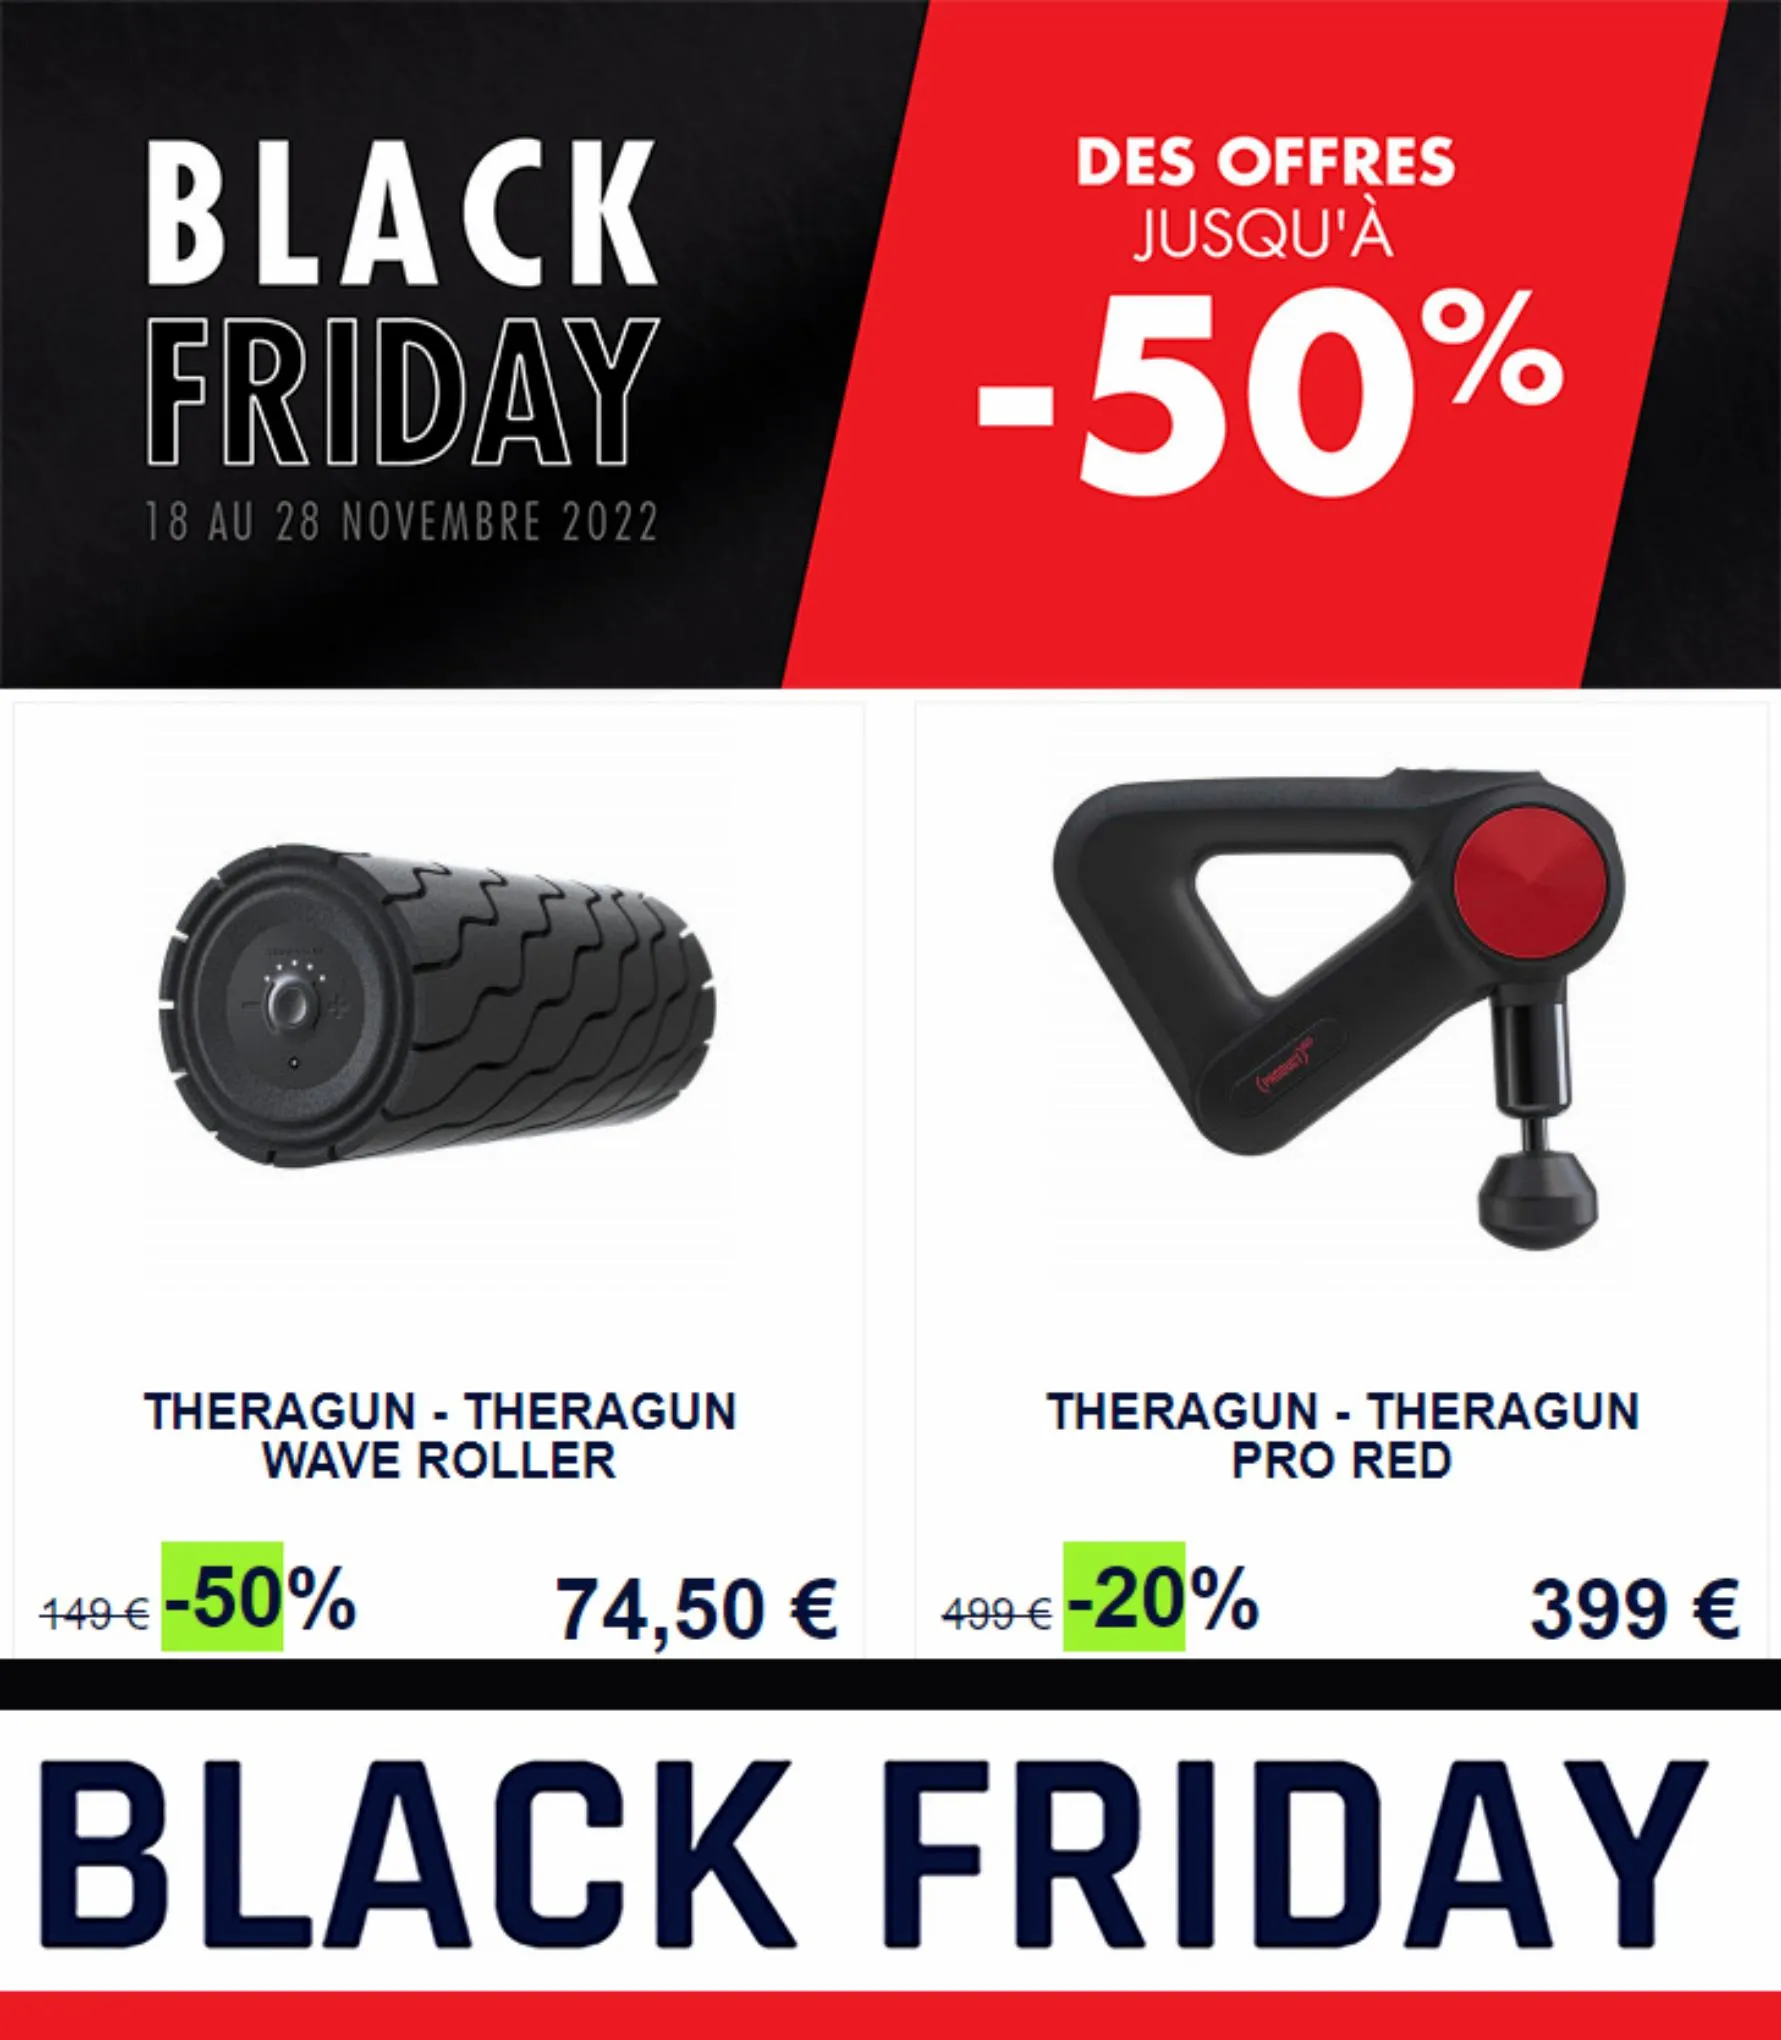 Catalogue Black Friday Offers -50%!, page 00003